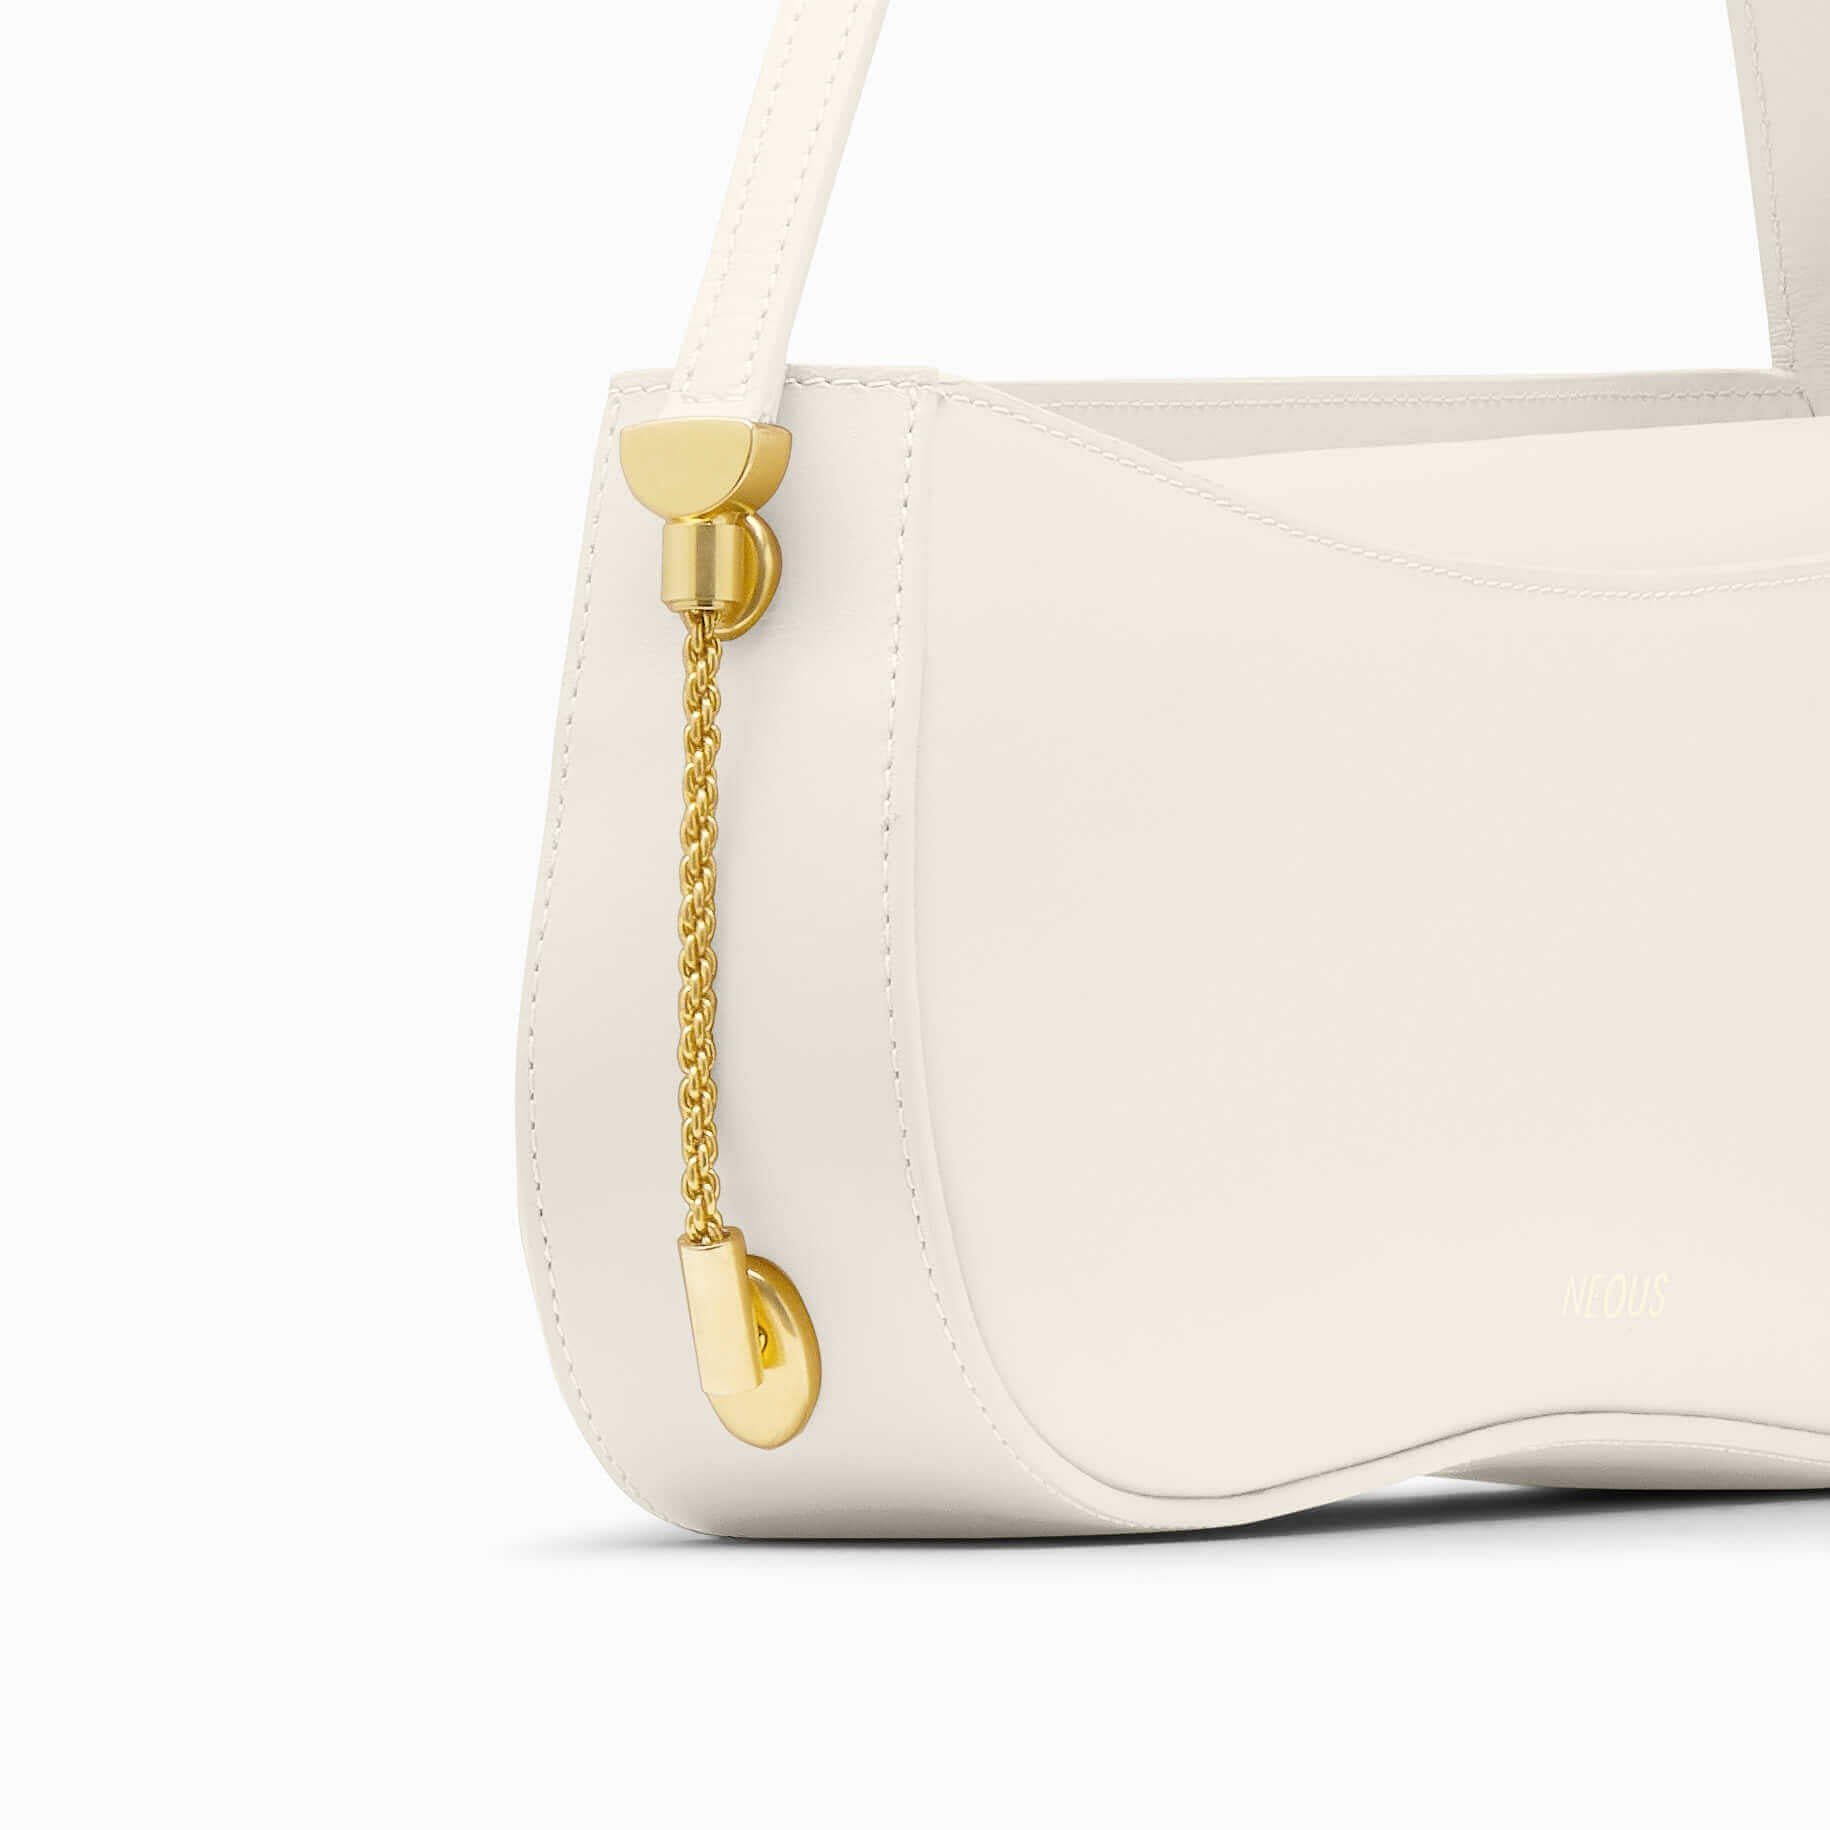 Neous Corvus Leather Baguette in Cream available at TNT The New Trend Australia.